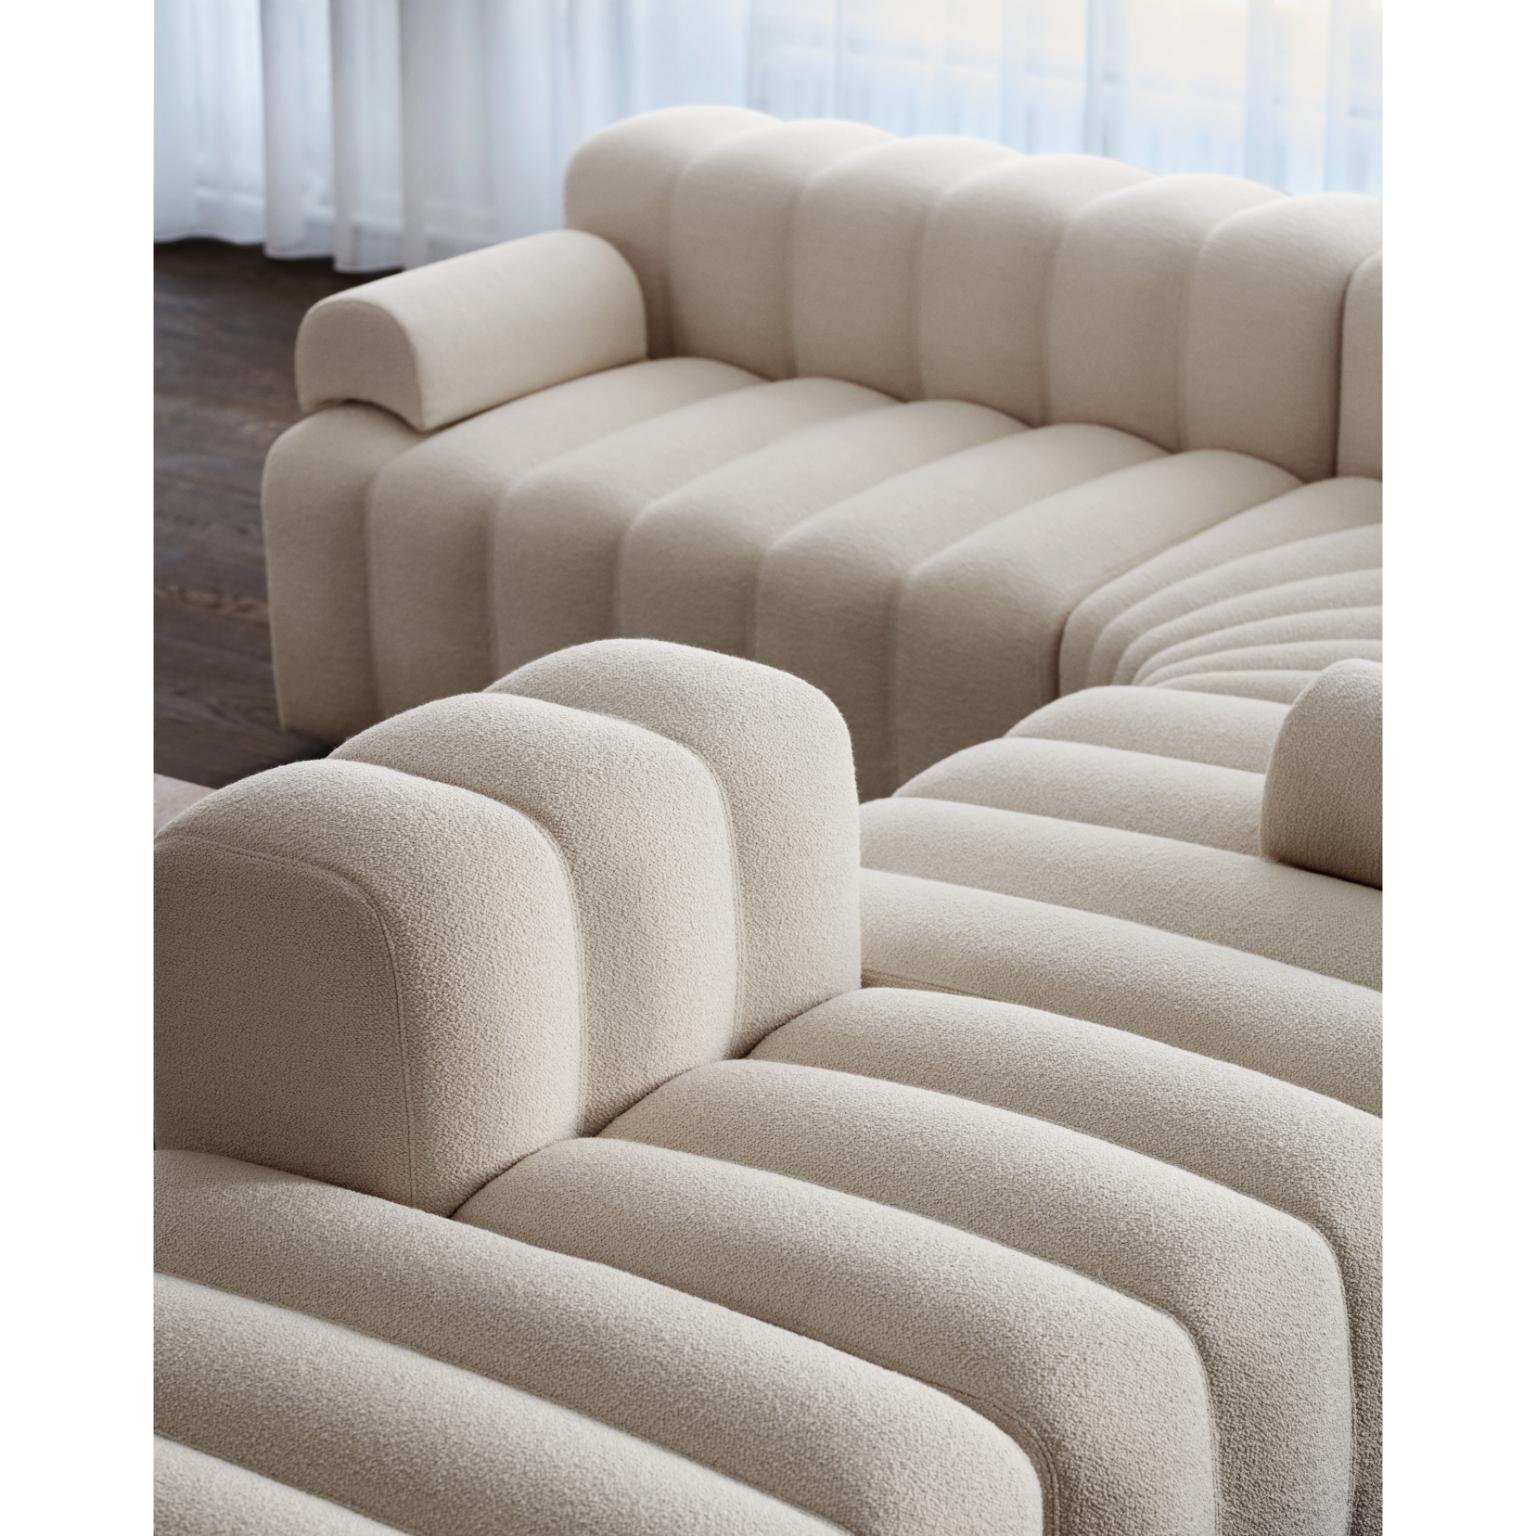 Studio Lounge Medium Left Modular Sofa With Armrest by NORR11
Dimensions: D 130 x W 113 x H 70 cm. SH 47 cm. 
Materials: Foam, wood and upholstery.
Upholstery: Barnum Boucle Color 3.

Available in different upholstery options. A plywood structure